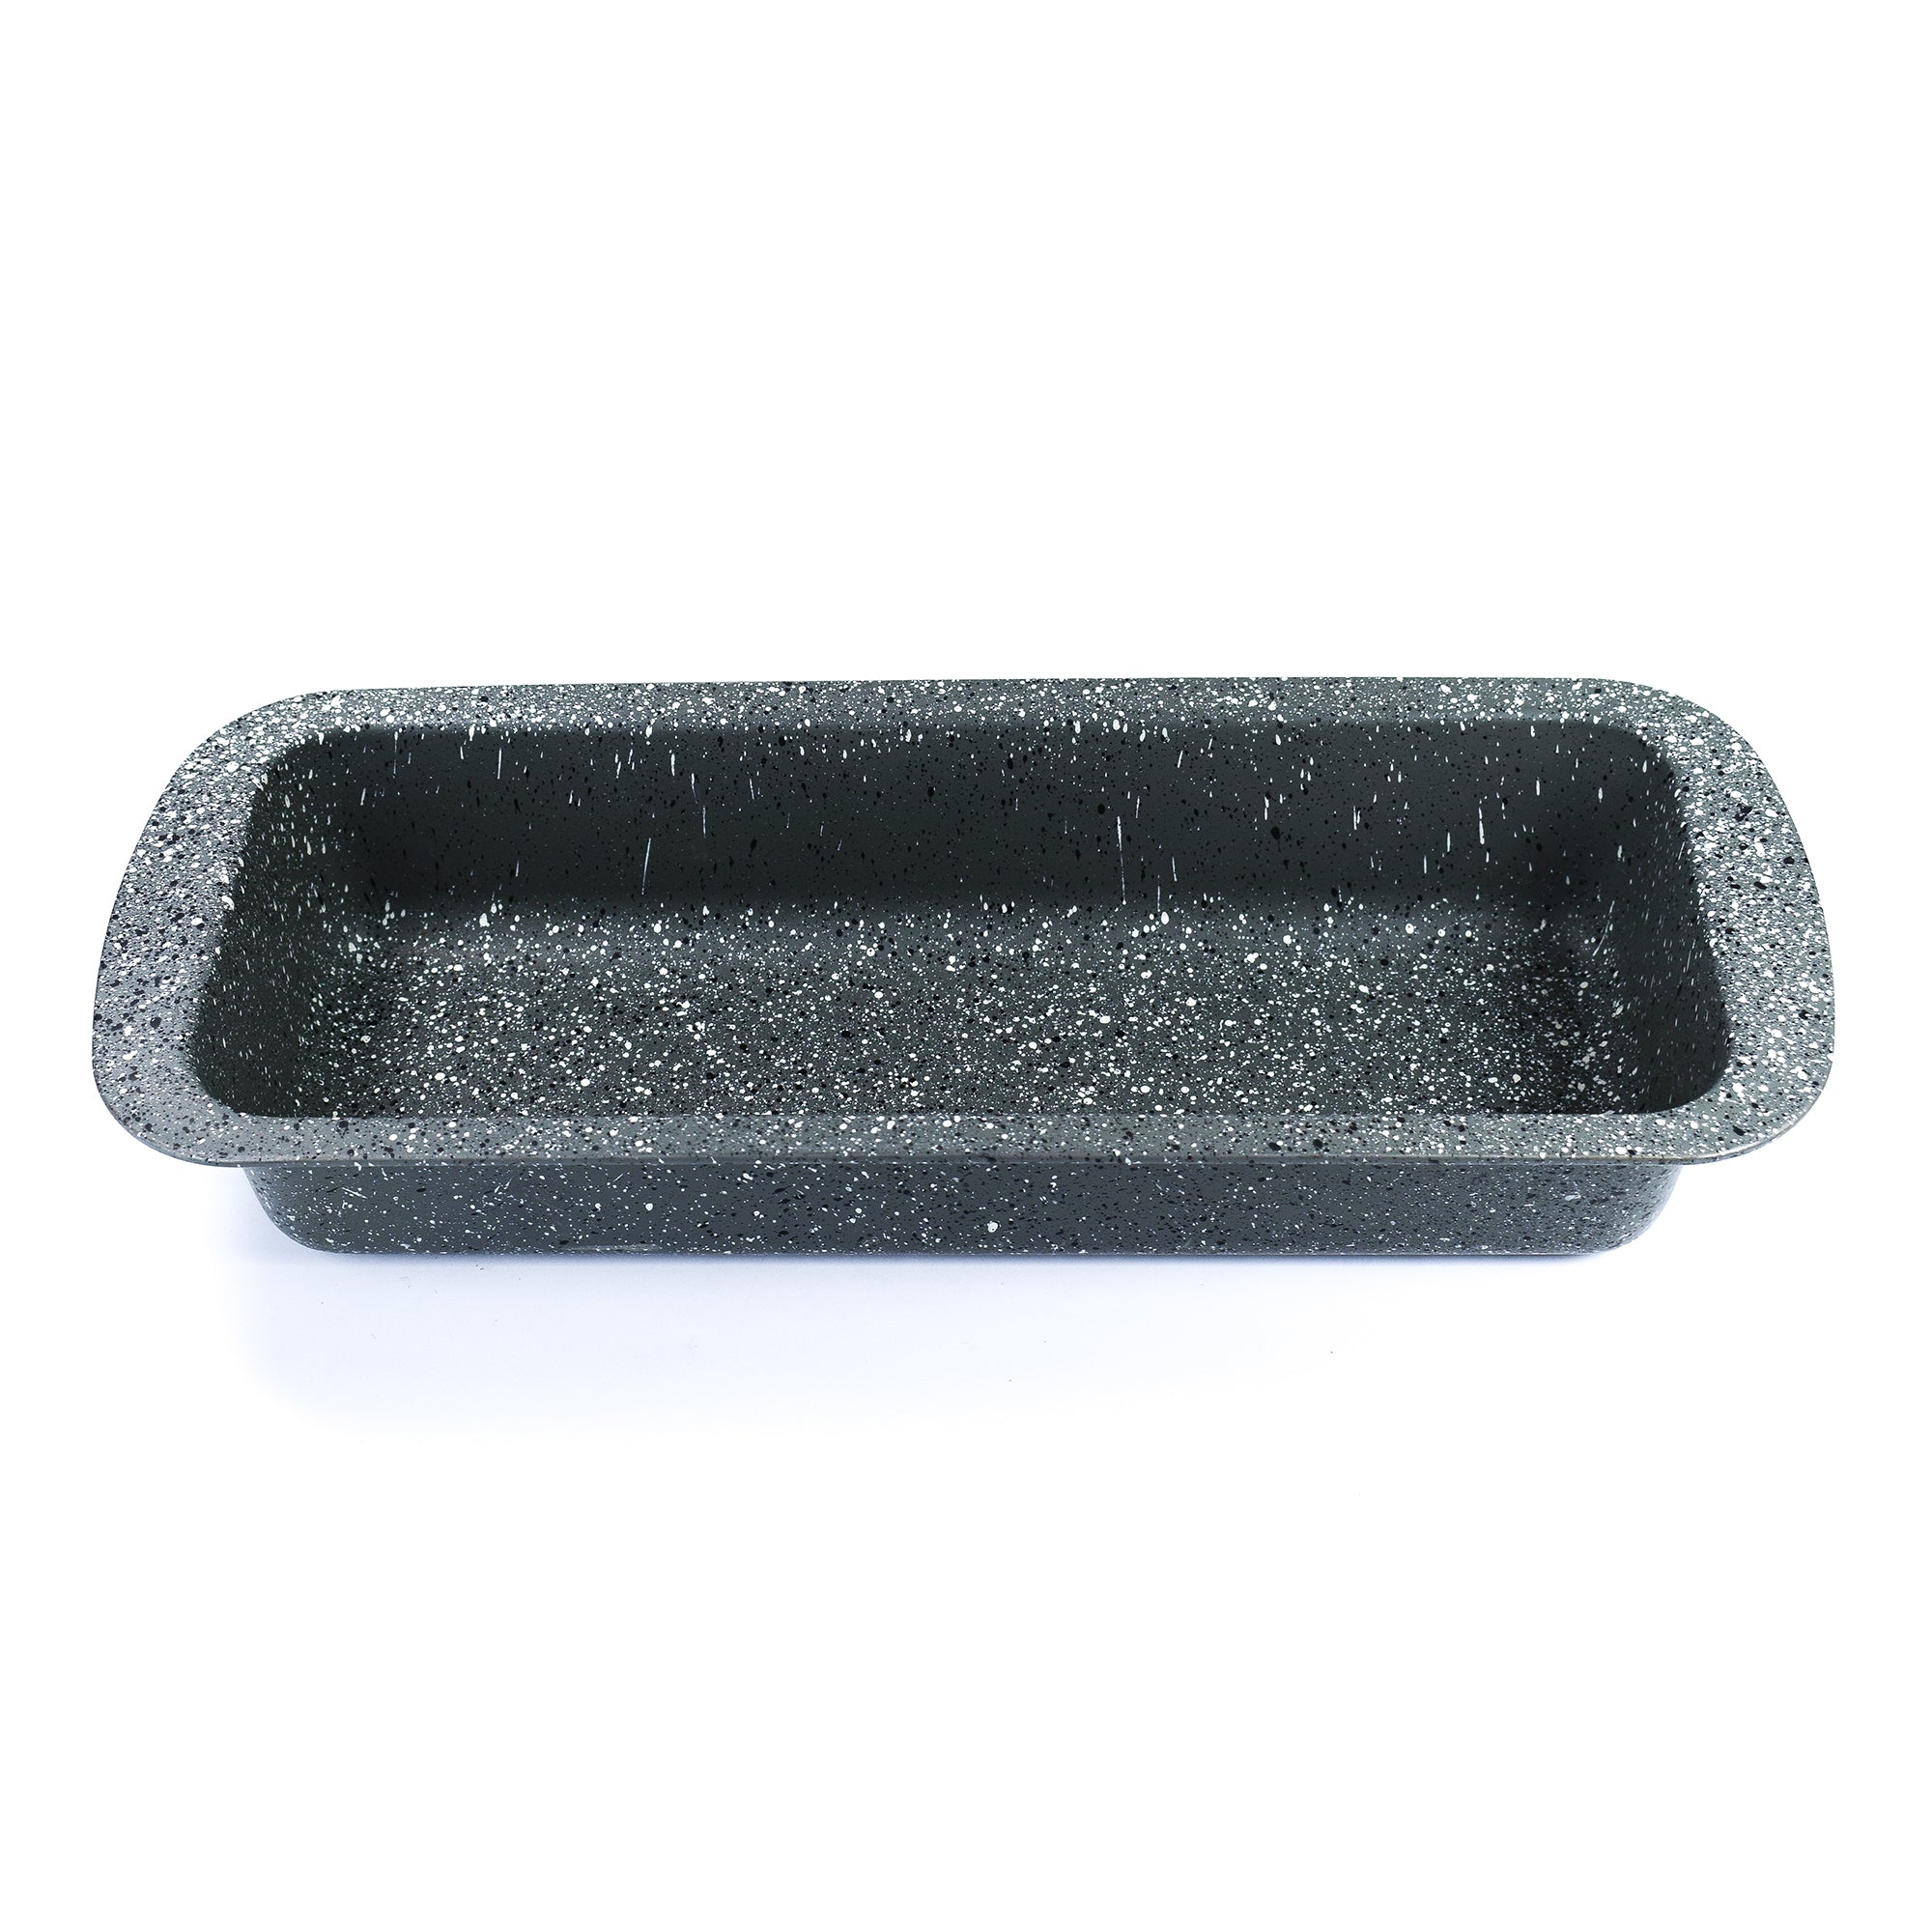 14 x 5.5 Inch Carbon Steel Non-Stick Loaf Pan